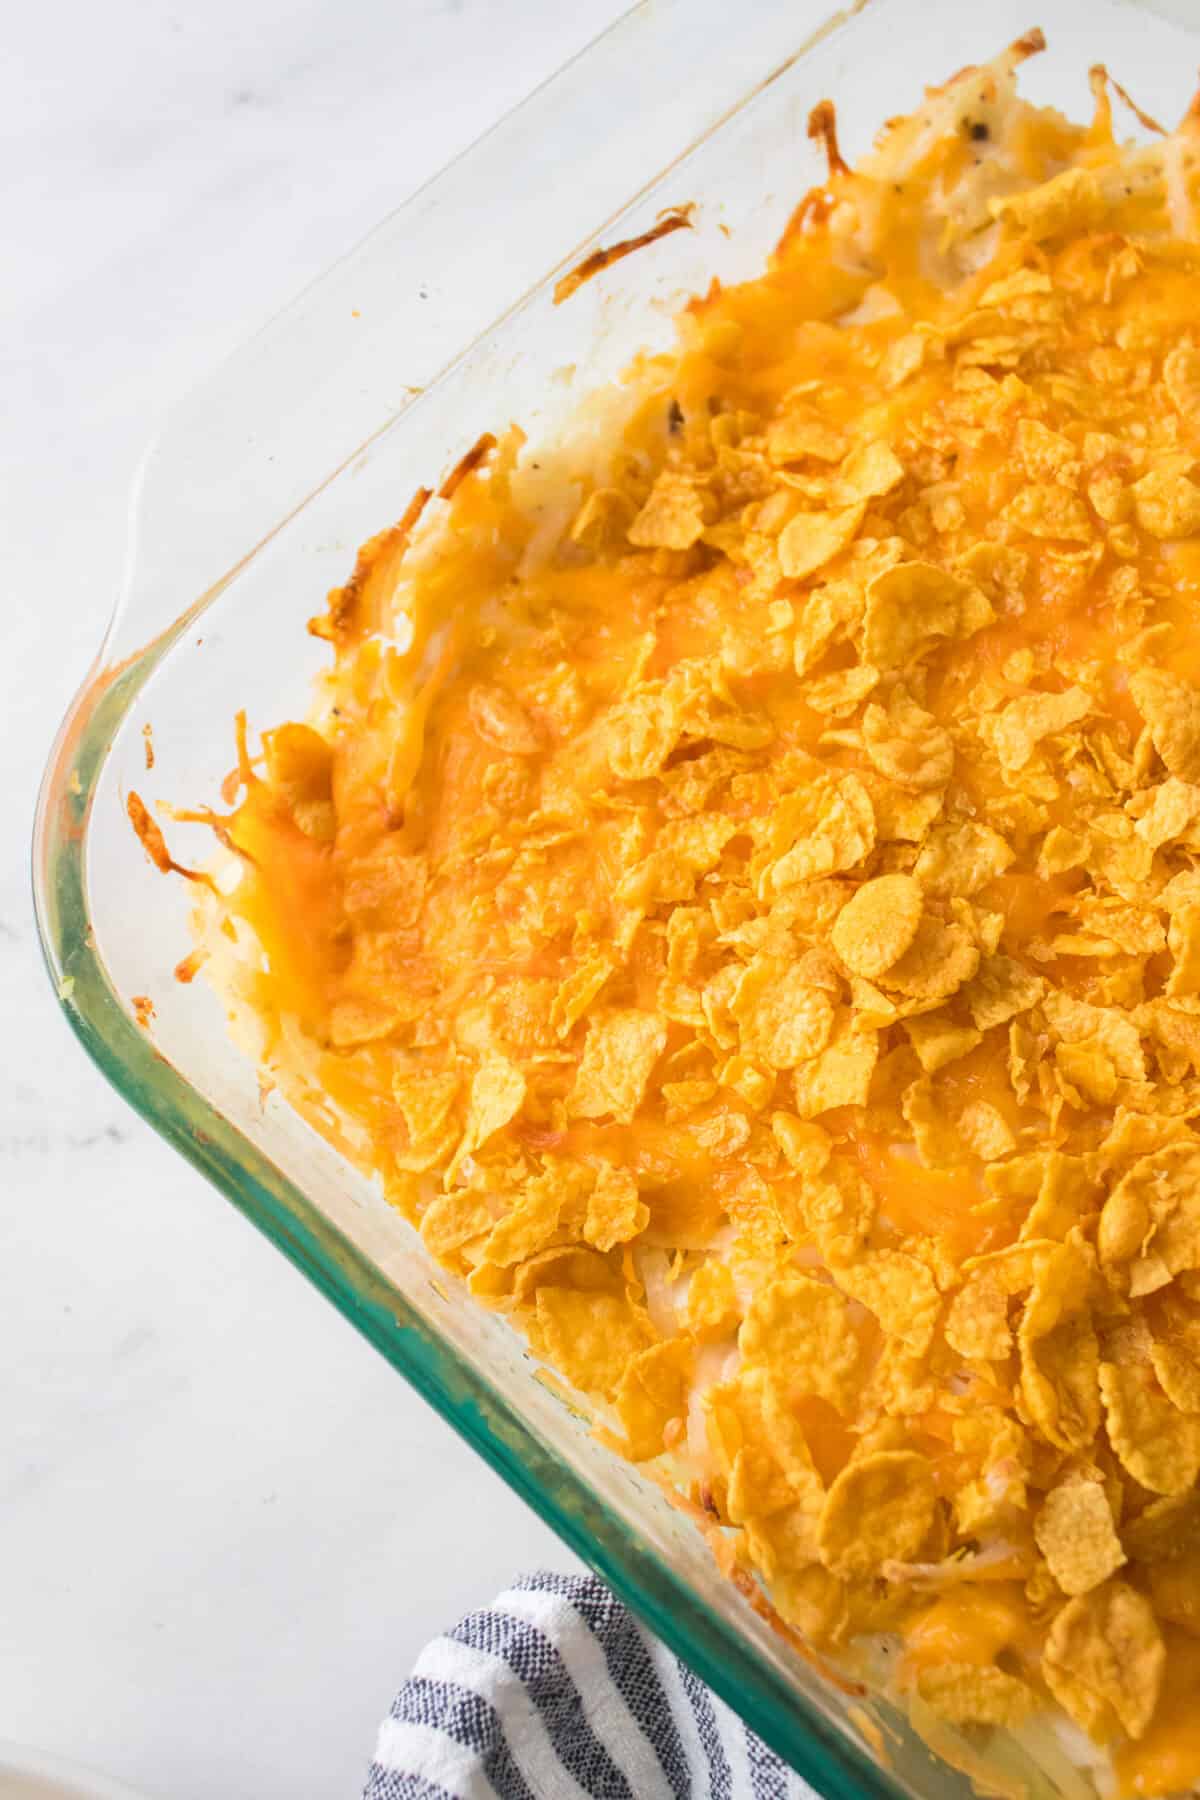 upclose vertical image of funeral potatoes in glass casserole dish